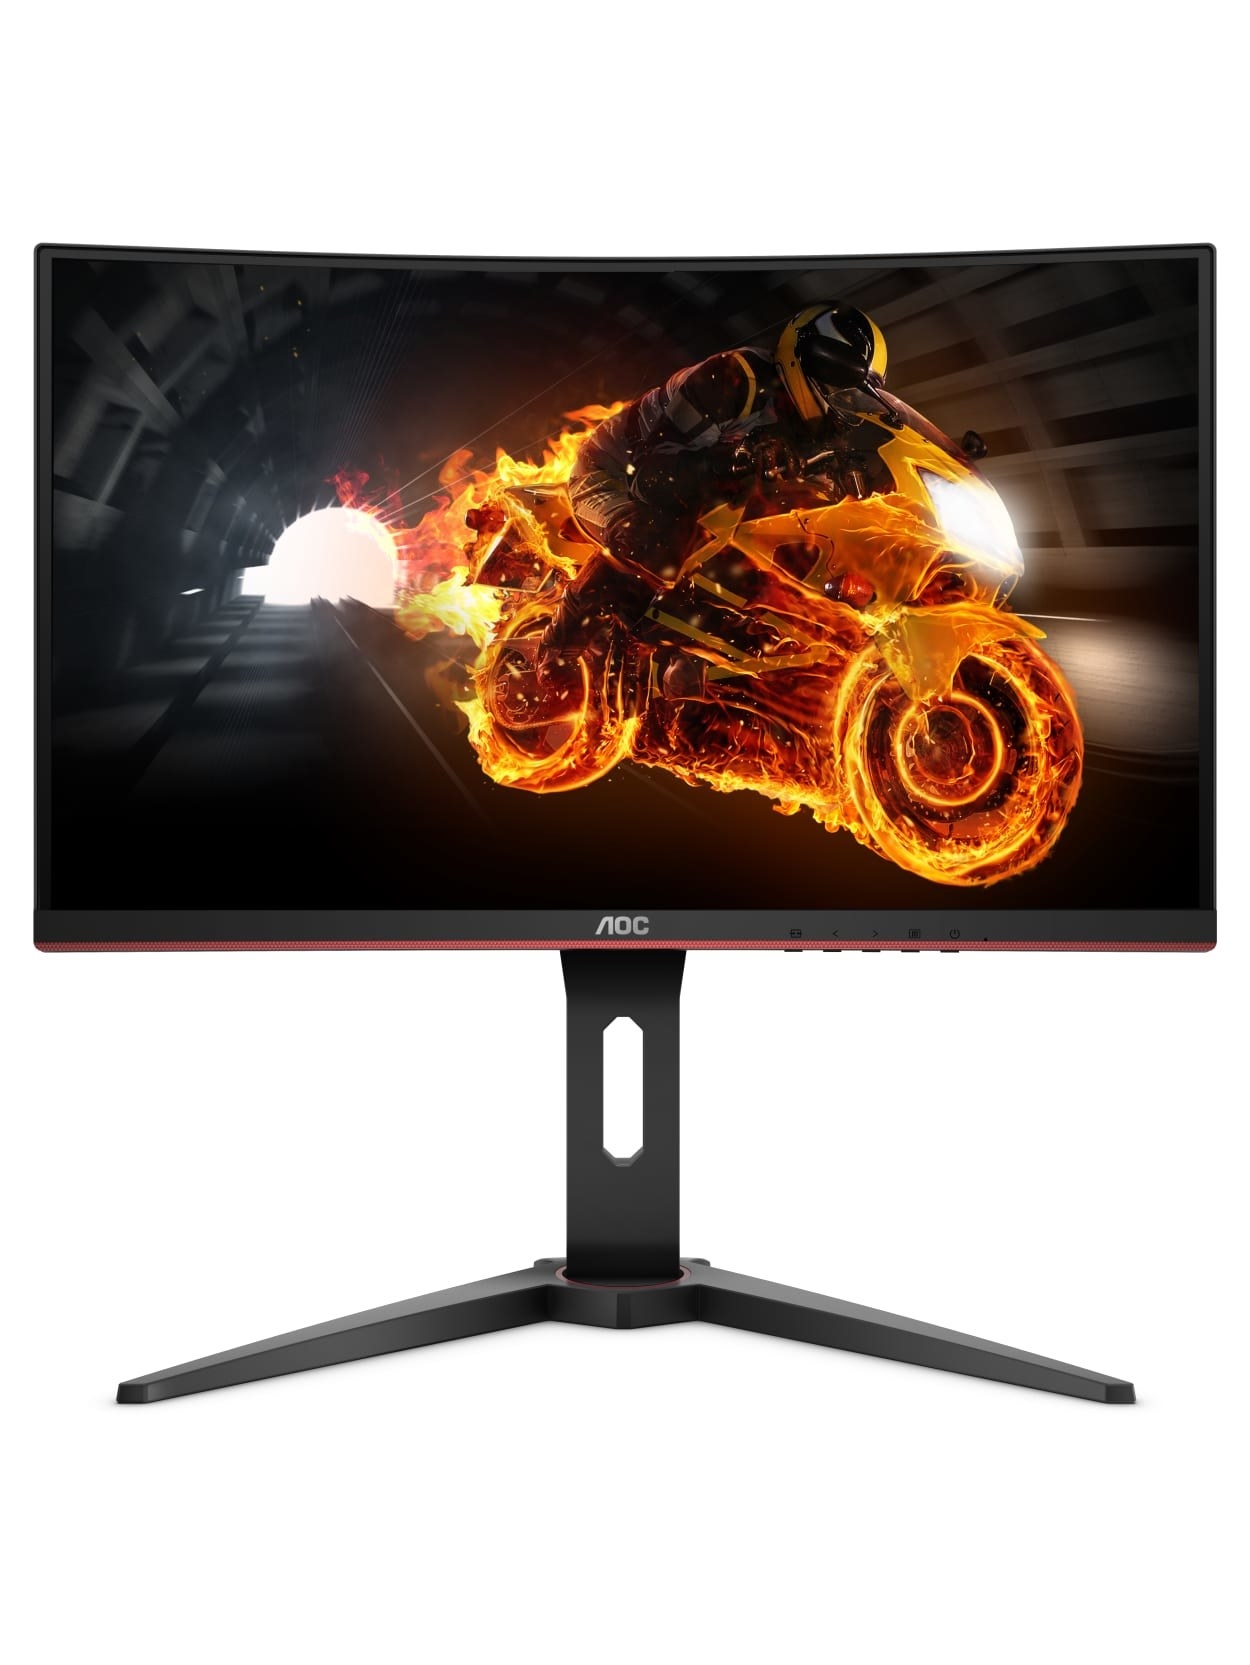 the curved PC monitor